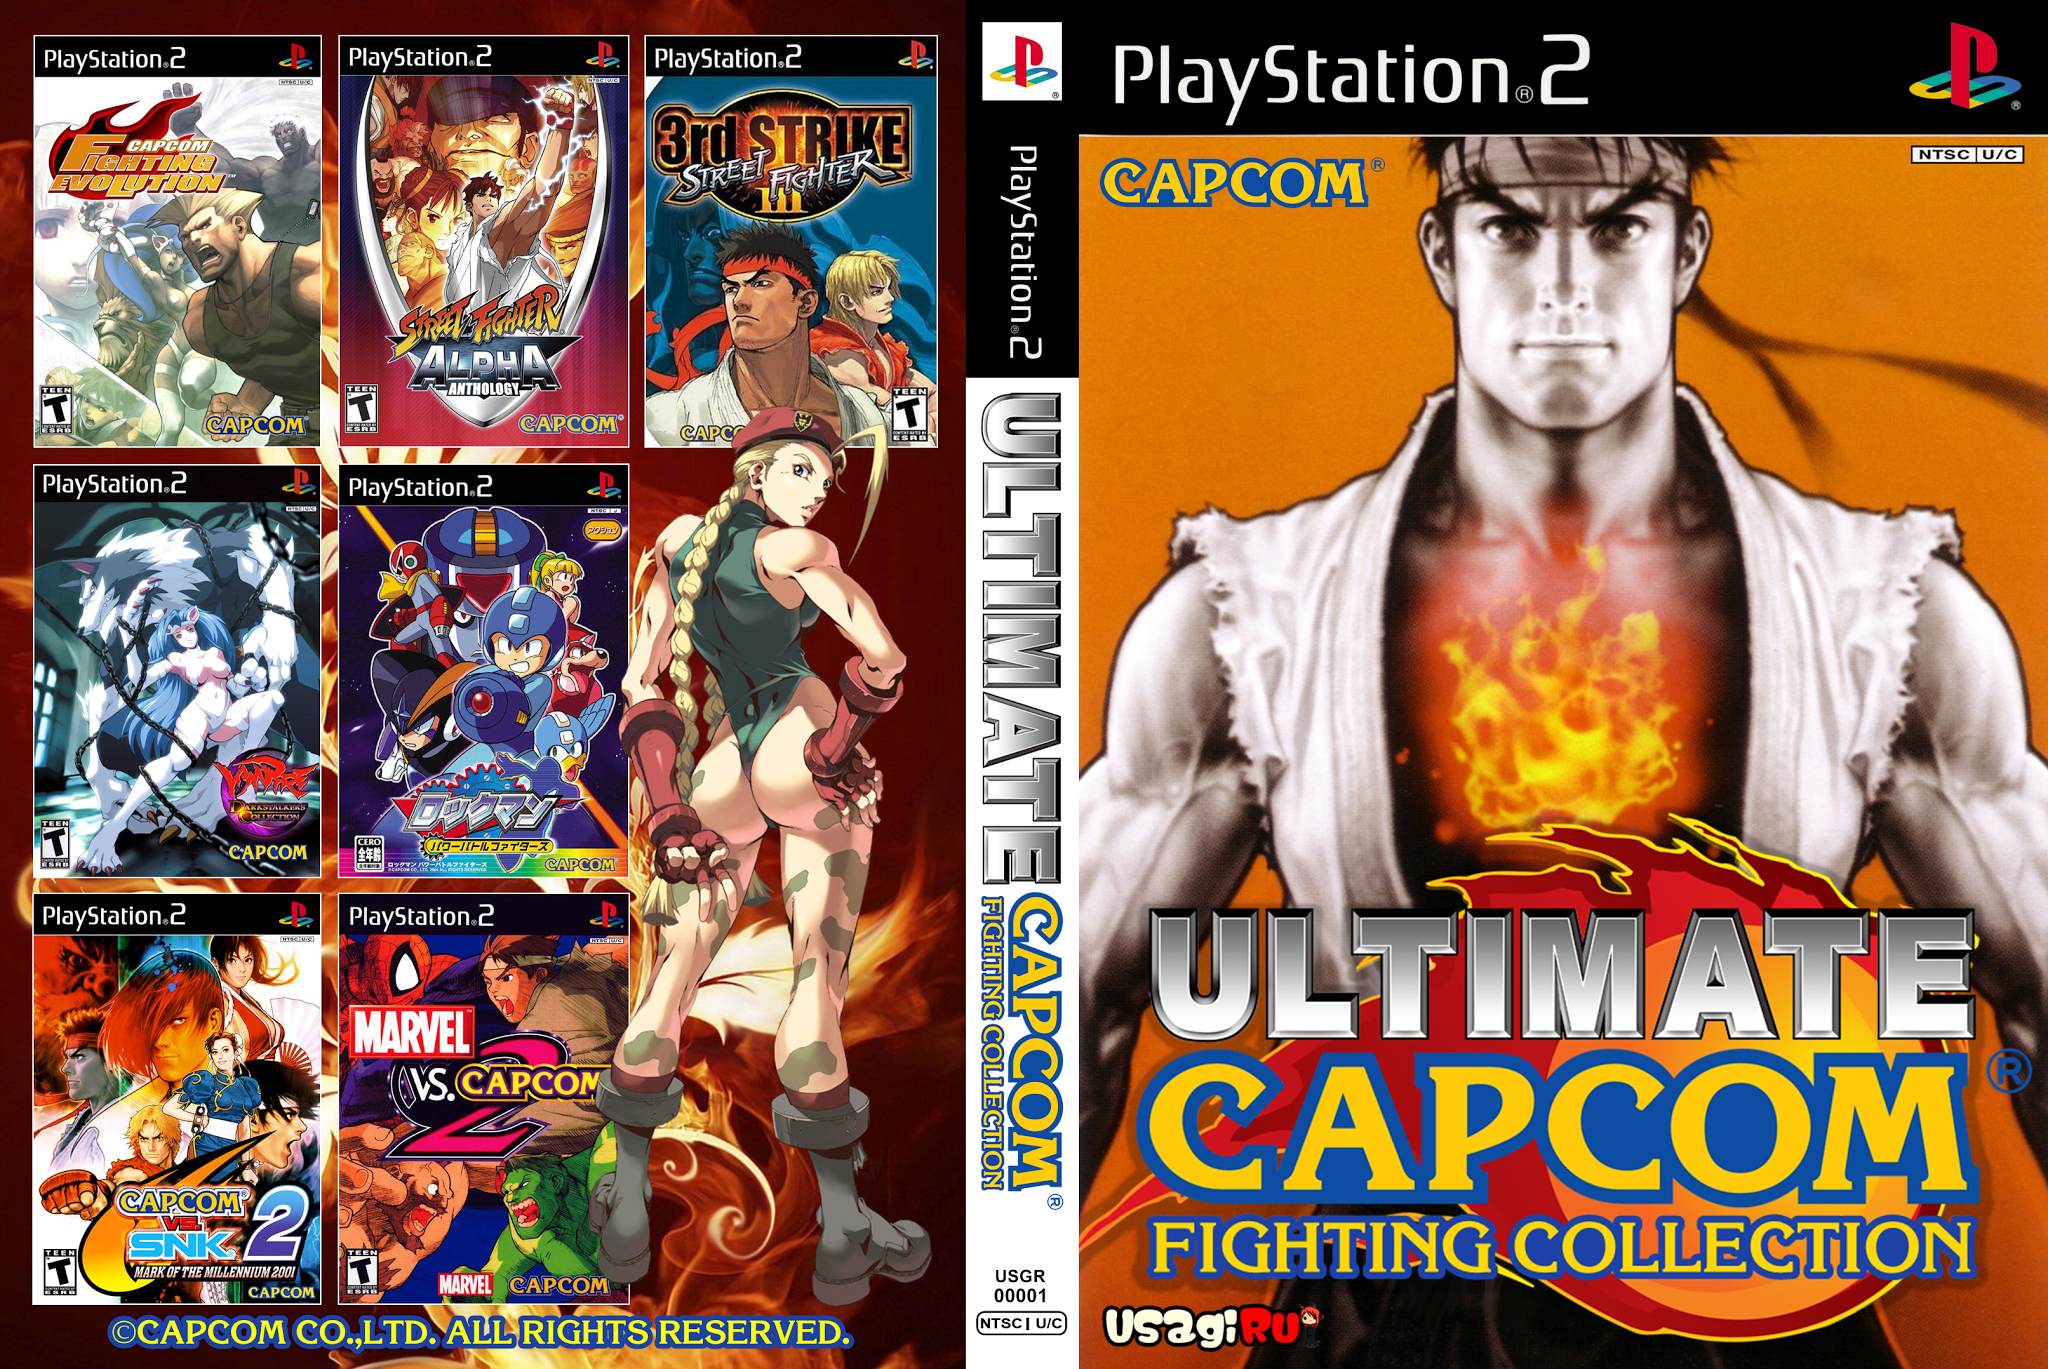 Collection ps2. Street Fighter collection Disc PS 1. Street Fighter collection Disc 1 ps1. Capcom Fighting на ps2. Street Fighter 2 ps2.